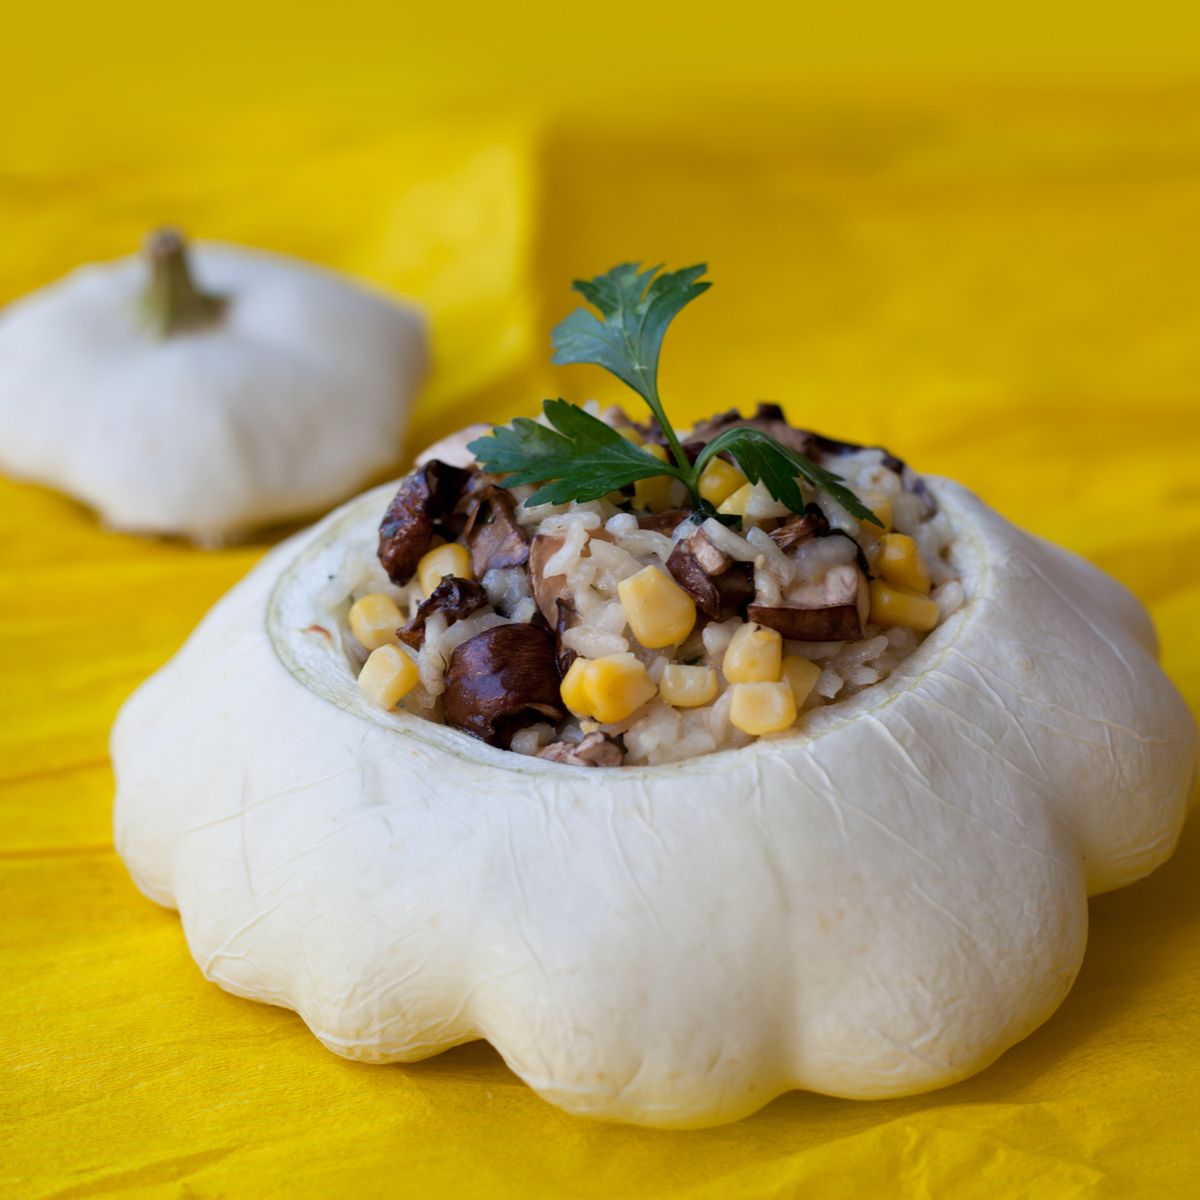 Risotto With Patty Pan Squash Recipe On Food52,How Long Is A Dog In Heat